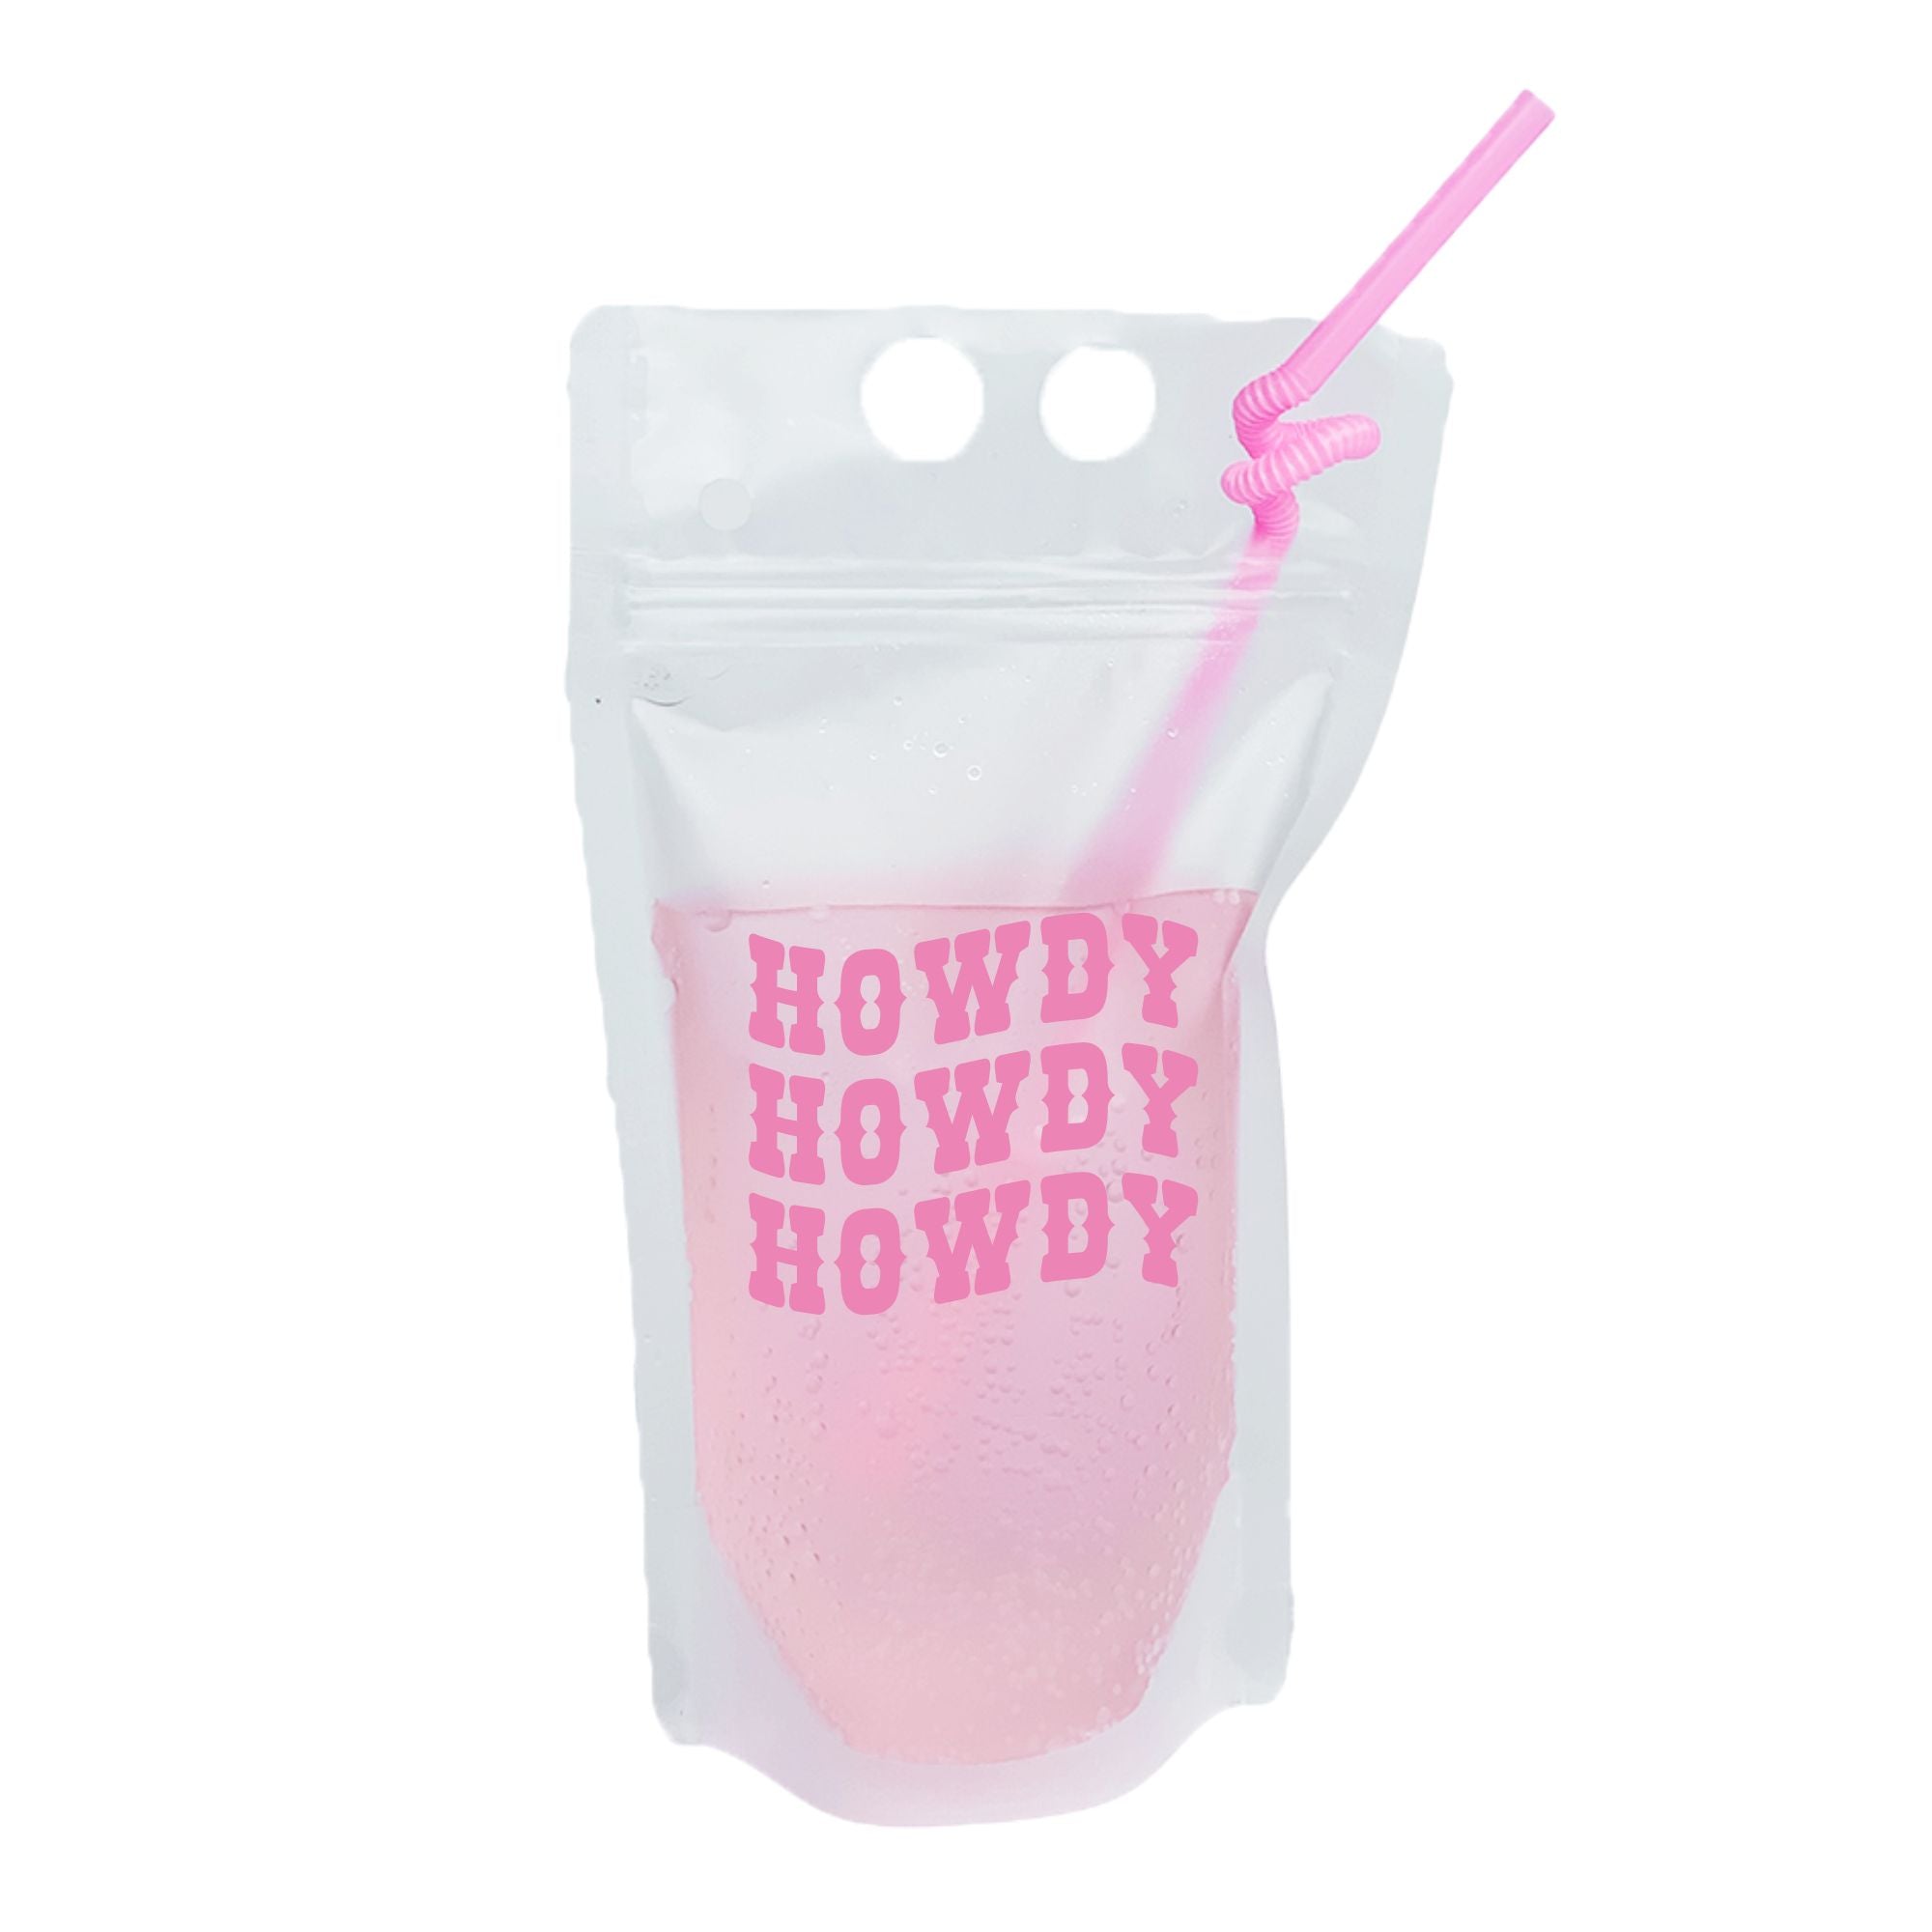 Howdy Party Pouch - Sprinkled With Pink #bachelorette #custom #gifts